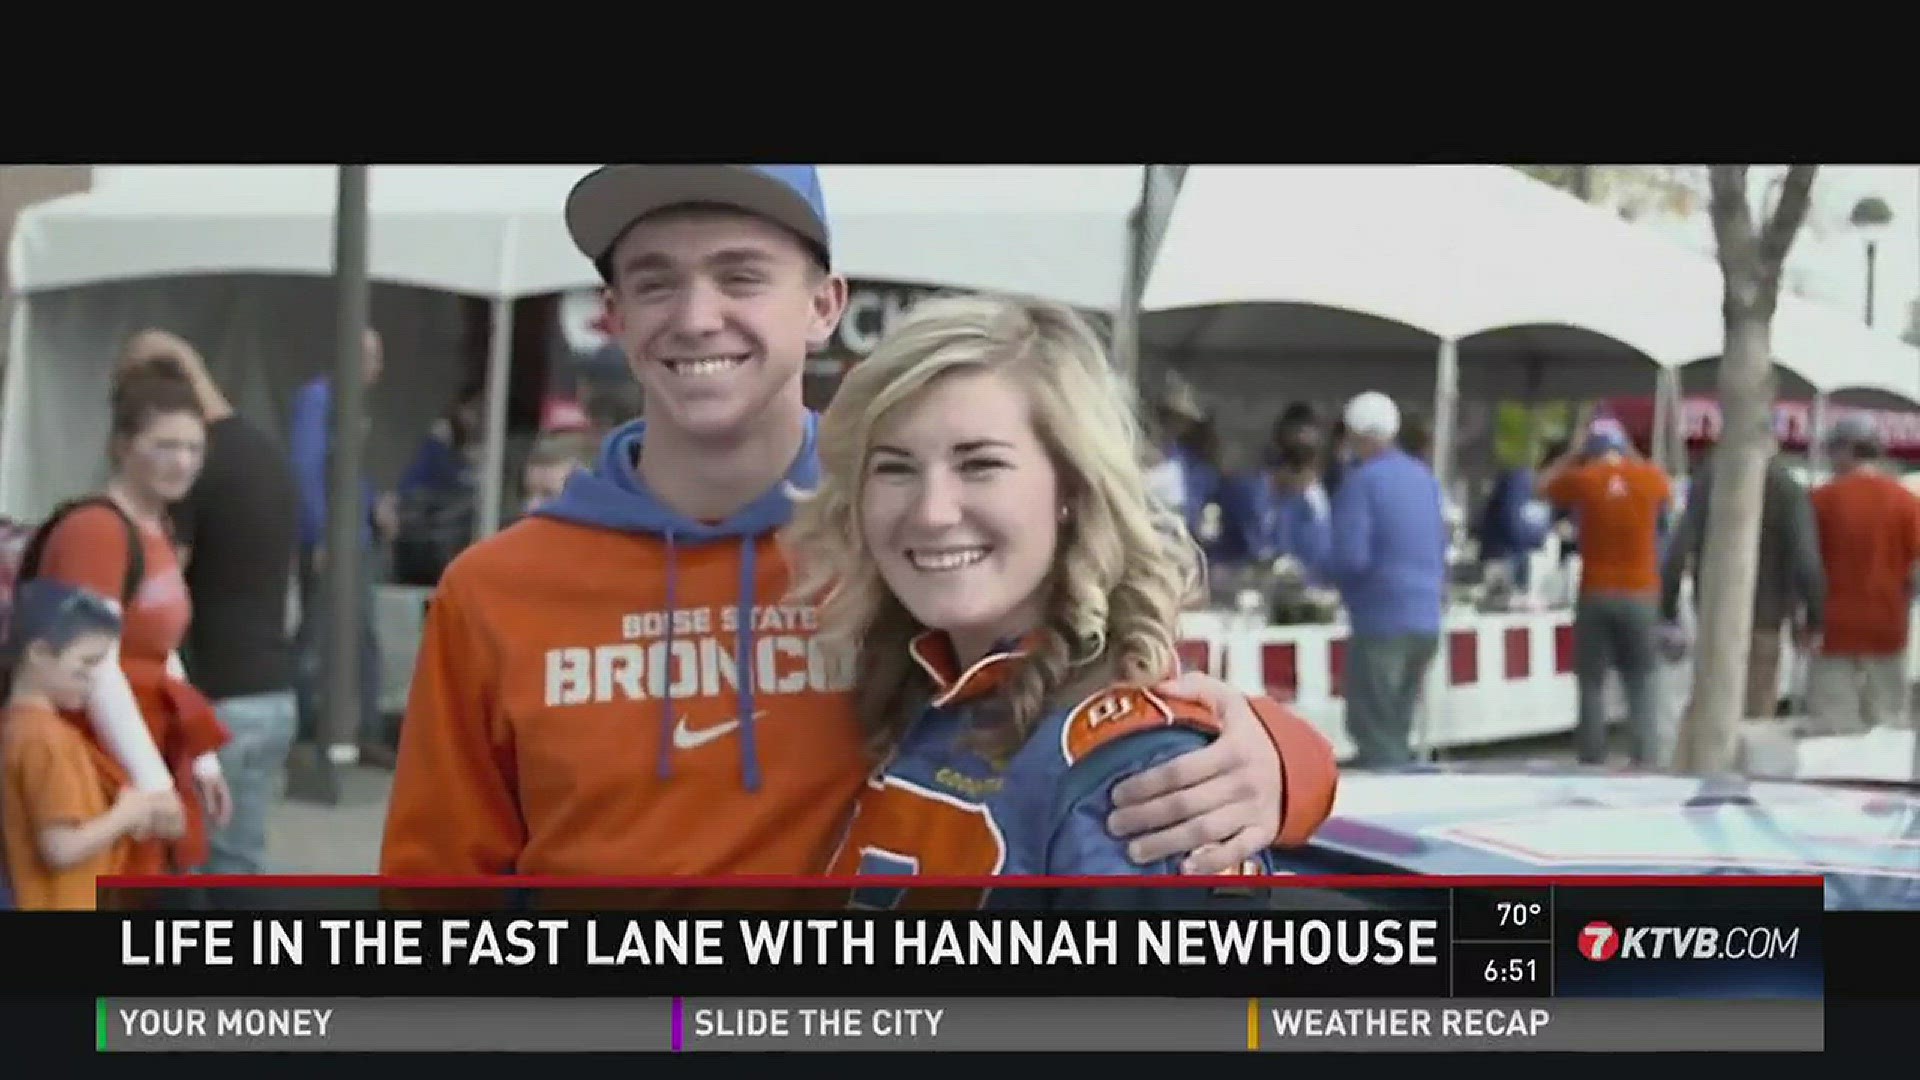 In pretty much all aspects of life... Twin Falls-native Hannah Newhouse has lived life in the fast lane. She graduated high school a year early, is taking summer classes at Boise State so she can try to do the same in college, and then of course, there is